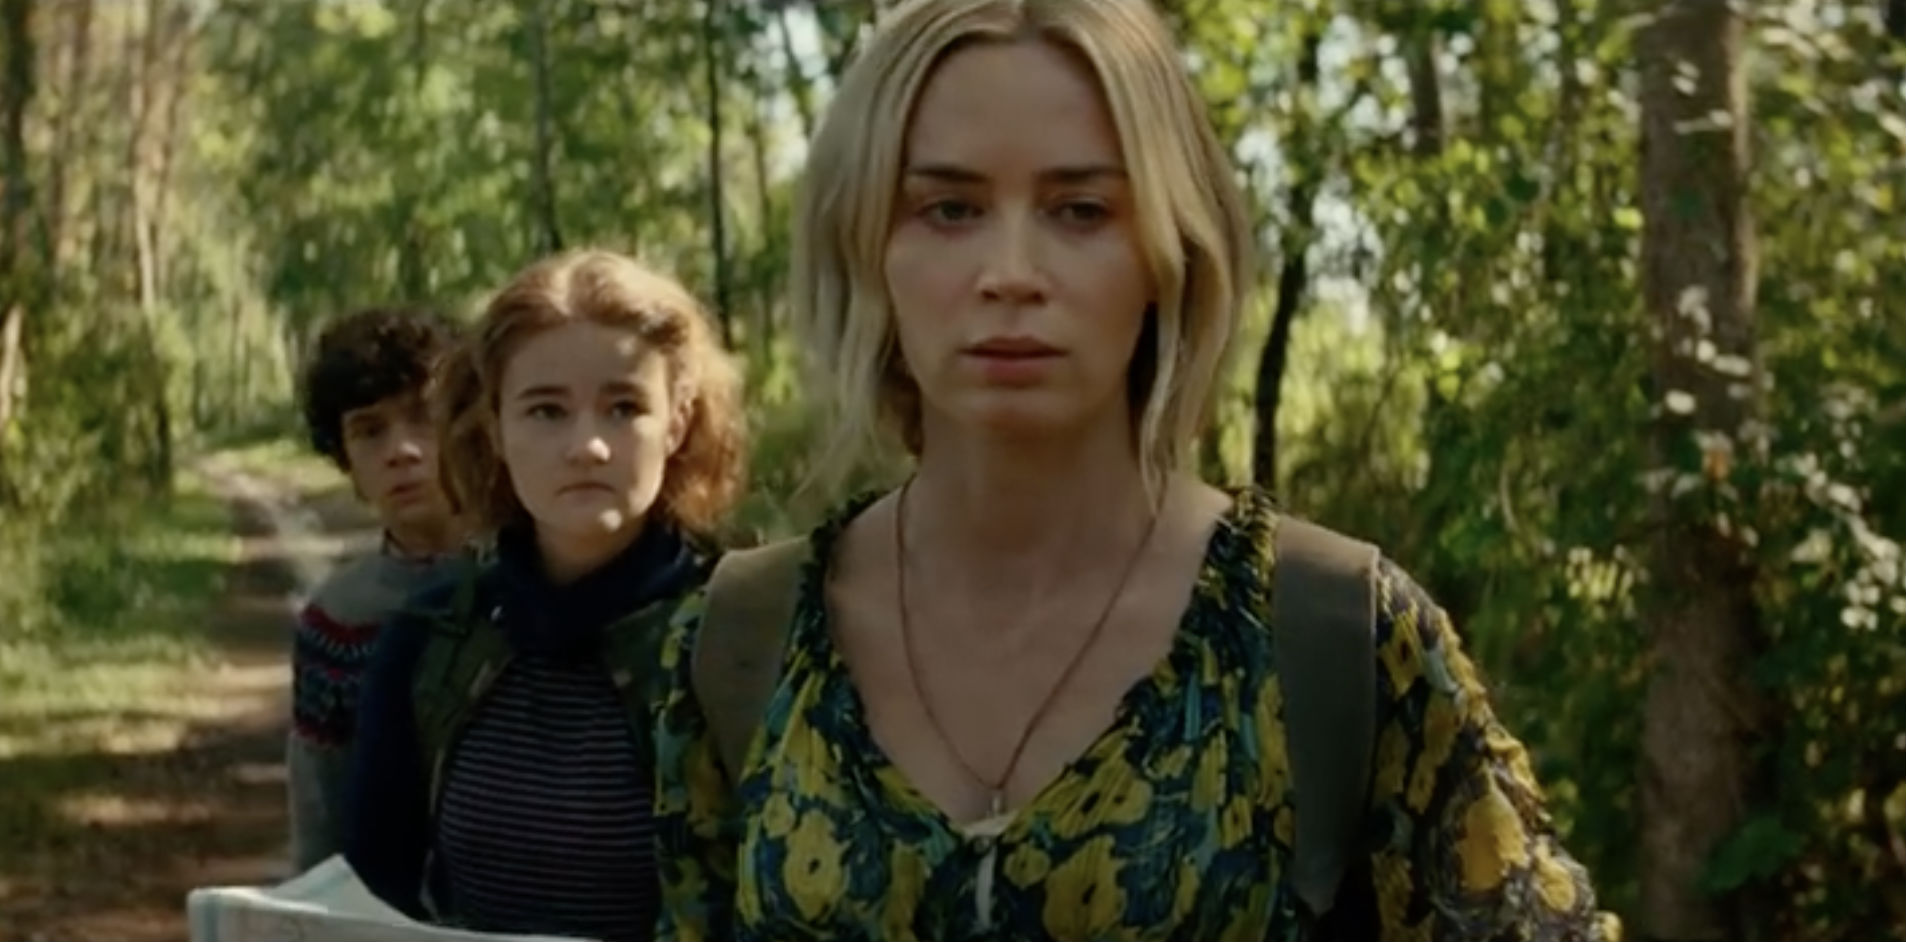 A Quiet Place Part II: Questions Are Answered In Super Bowl Spot & Featurette